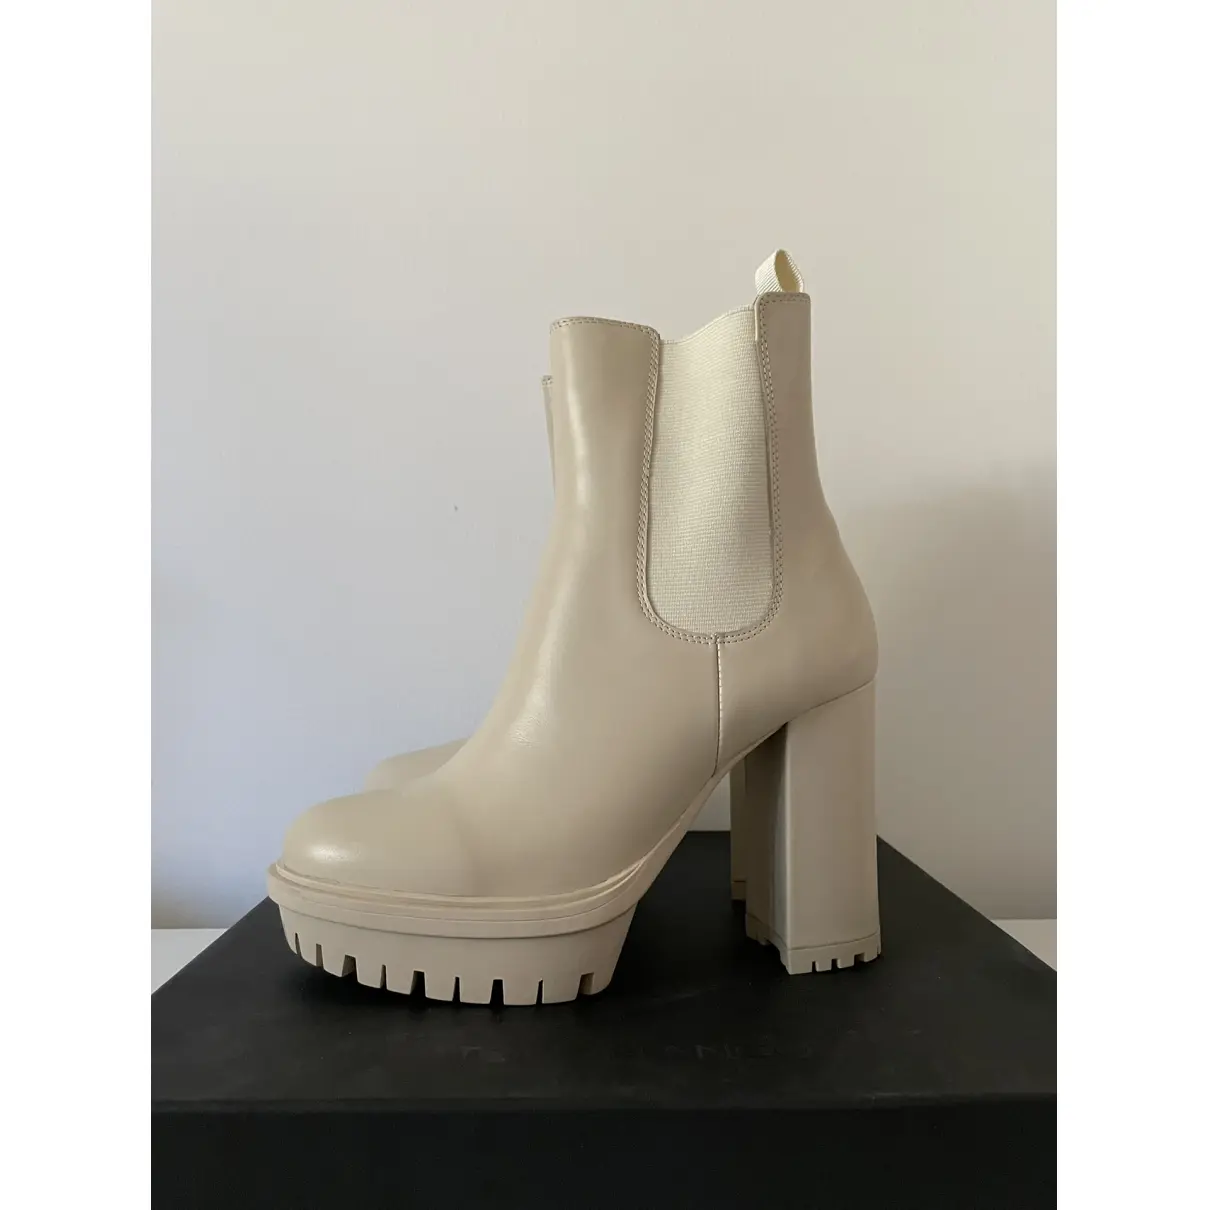 Buy Tony Bianco Leather ankle boots online